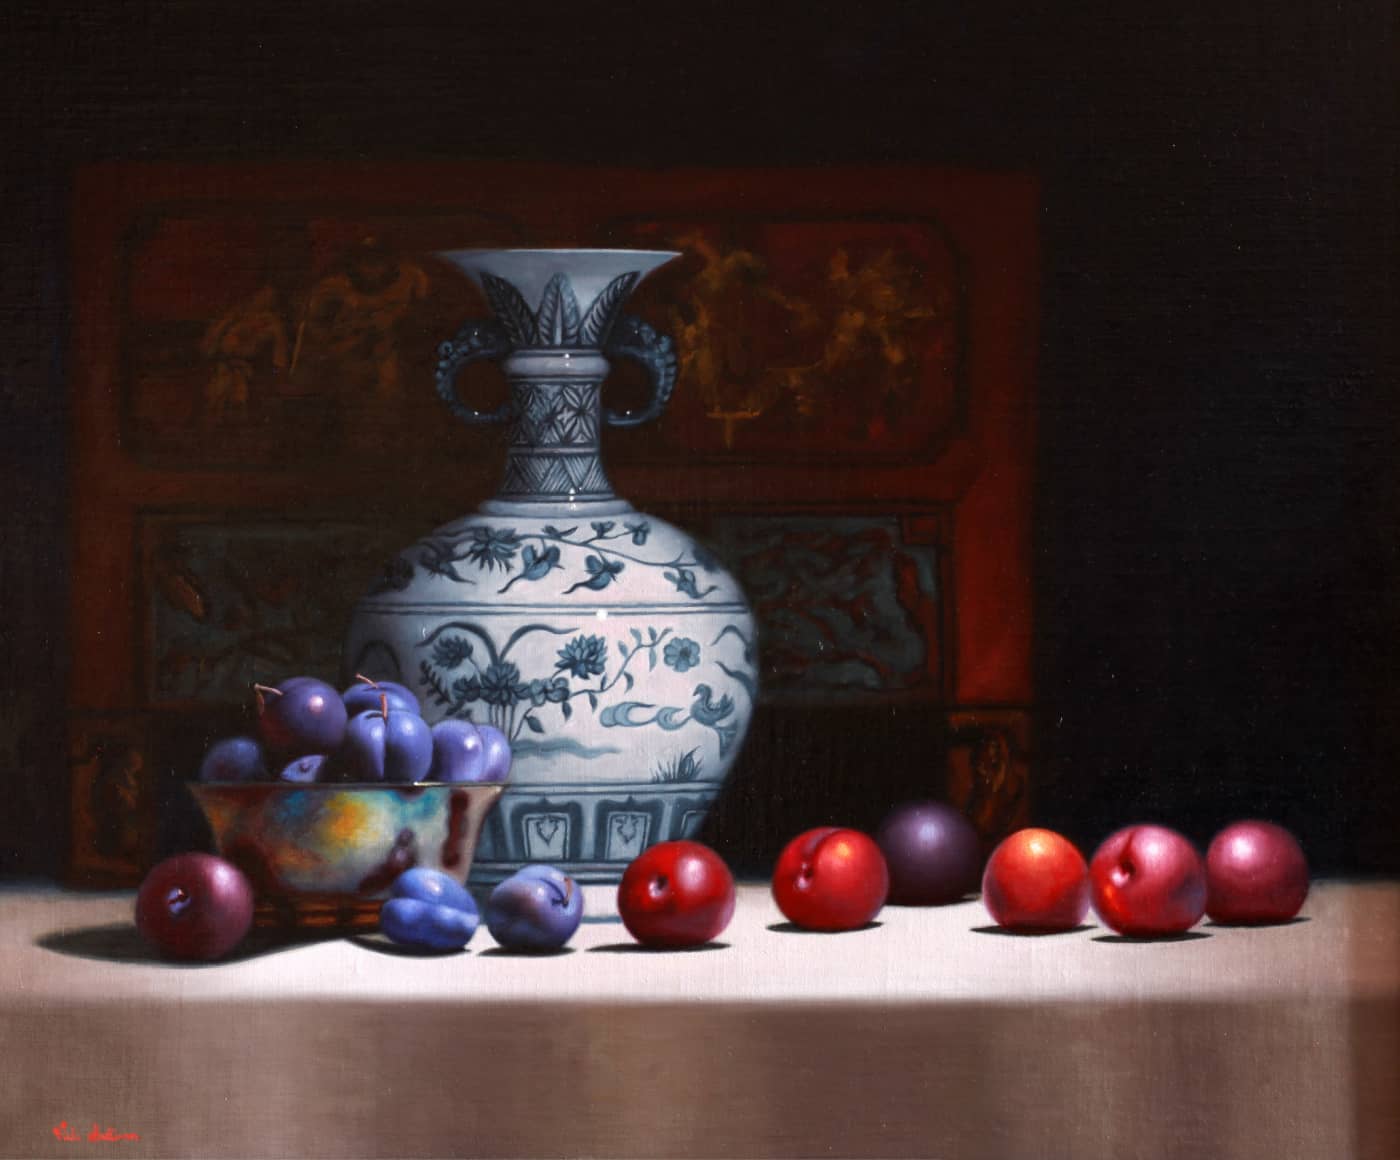 Vicki Sullivan Painting ~ 'Blue Plums and Chinese Vase' - Curate Art & Design Gallery Sorrento Mornington Peninsula Melbourne